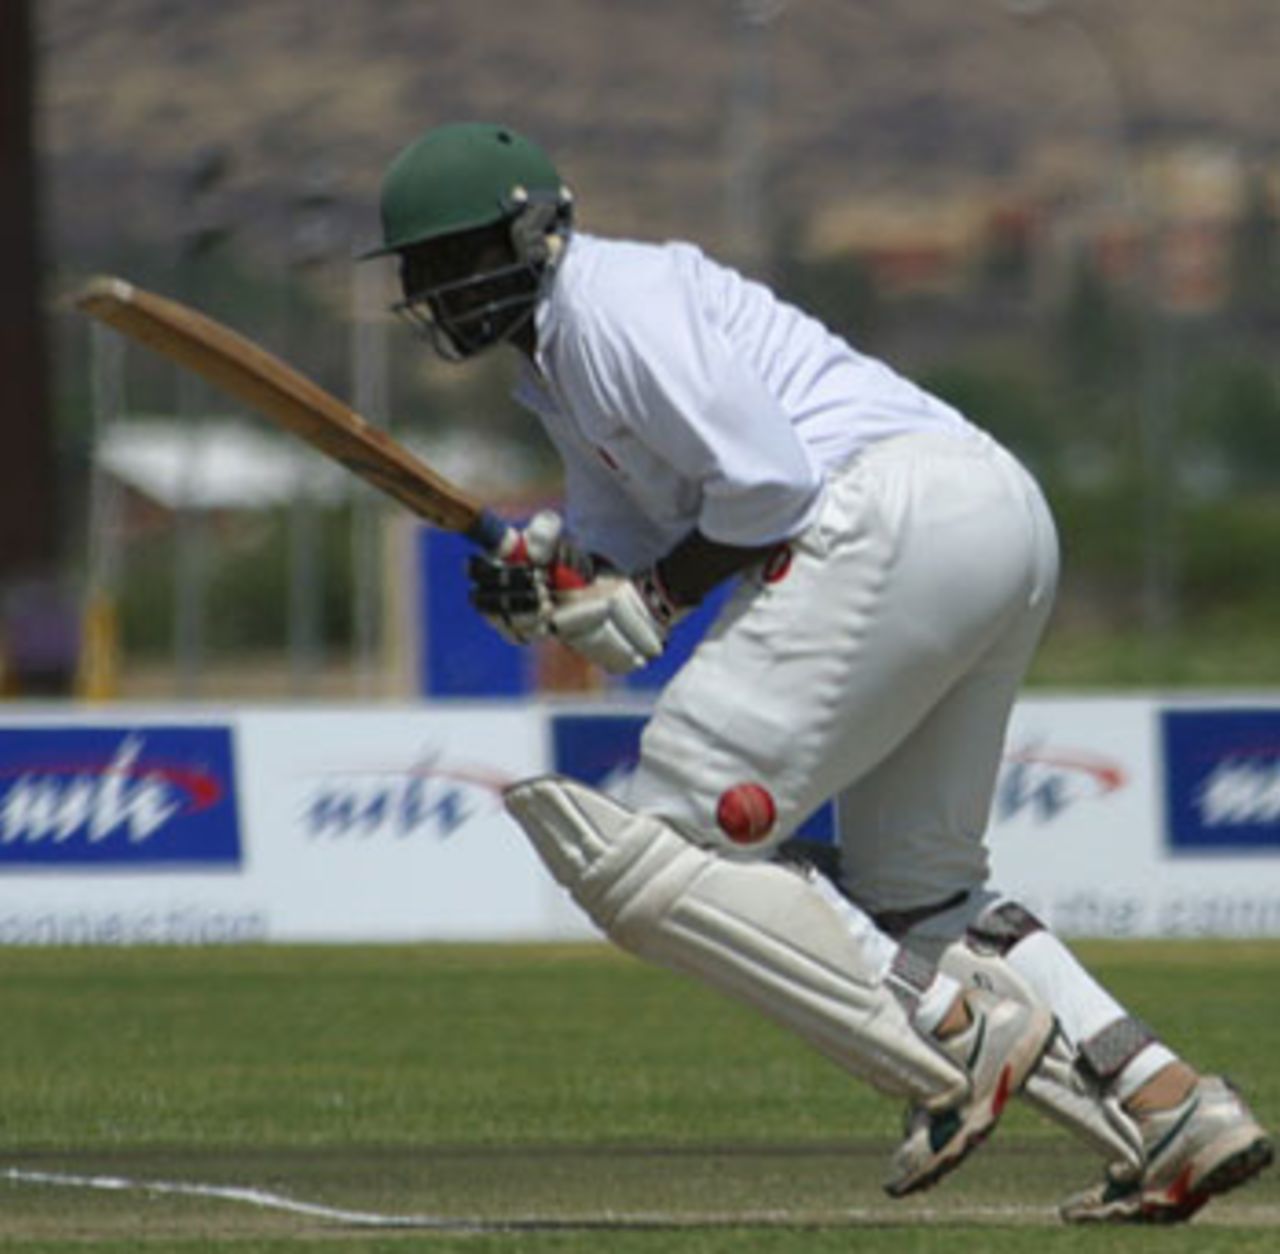 Kennedy Otieno clips one to leg during Kenya's ICC Intercontinental Cup fixture against Bermuda, October 25, 2005